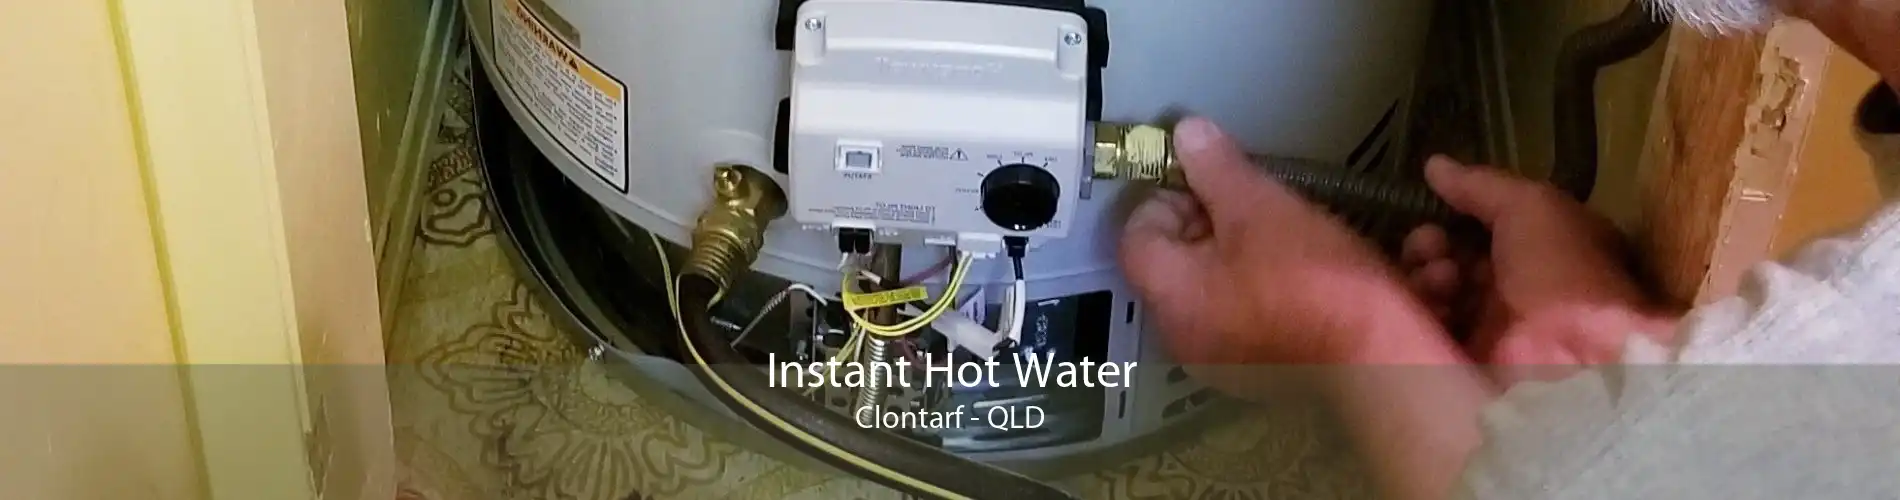 Instant Hot Water Clontarf - QLD